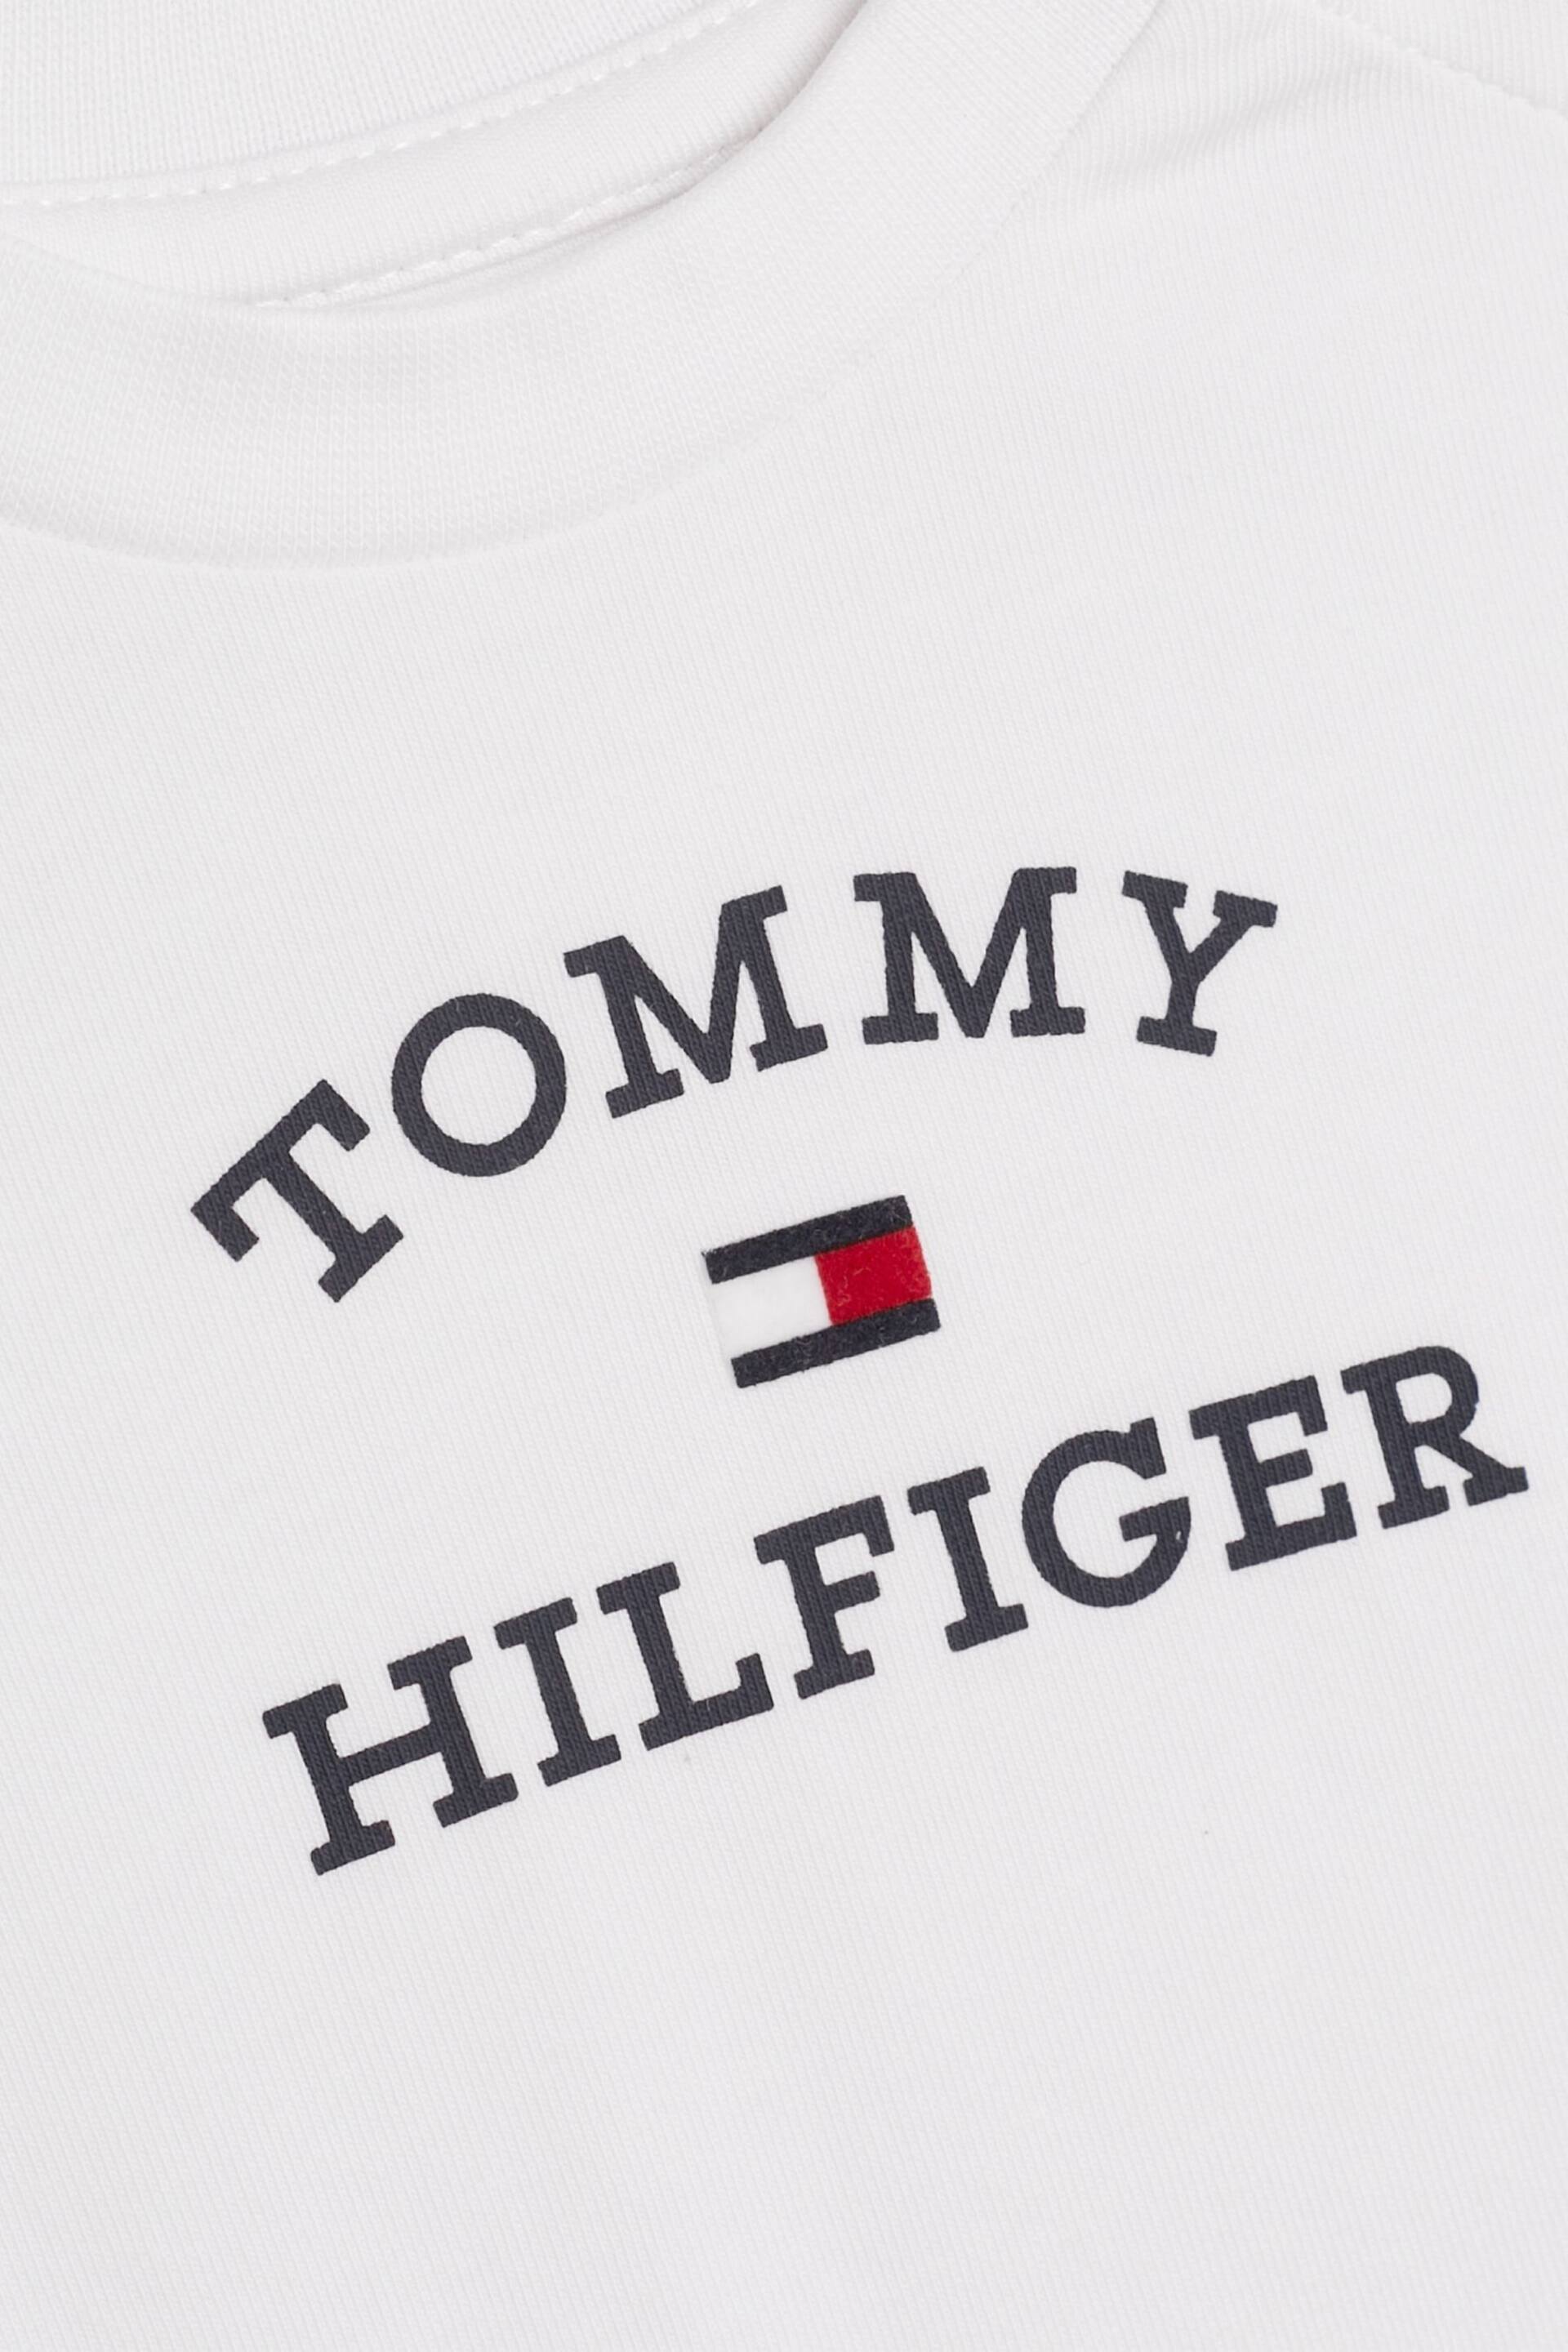 Tommy Hilfiger Baby Logo White T-Shirt - Image 3 of 3